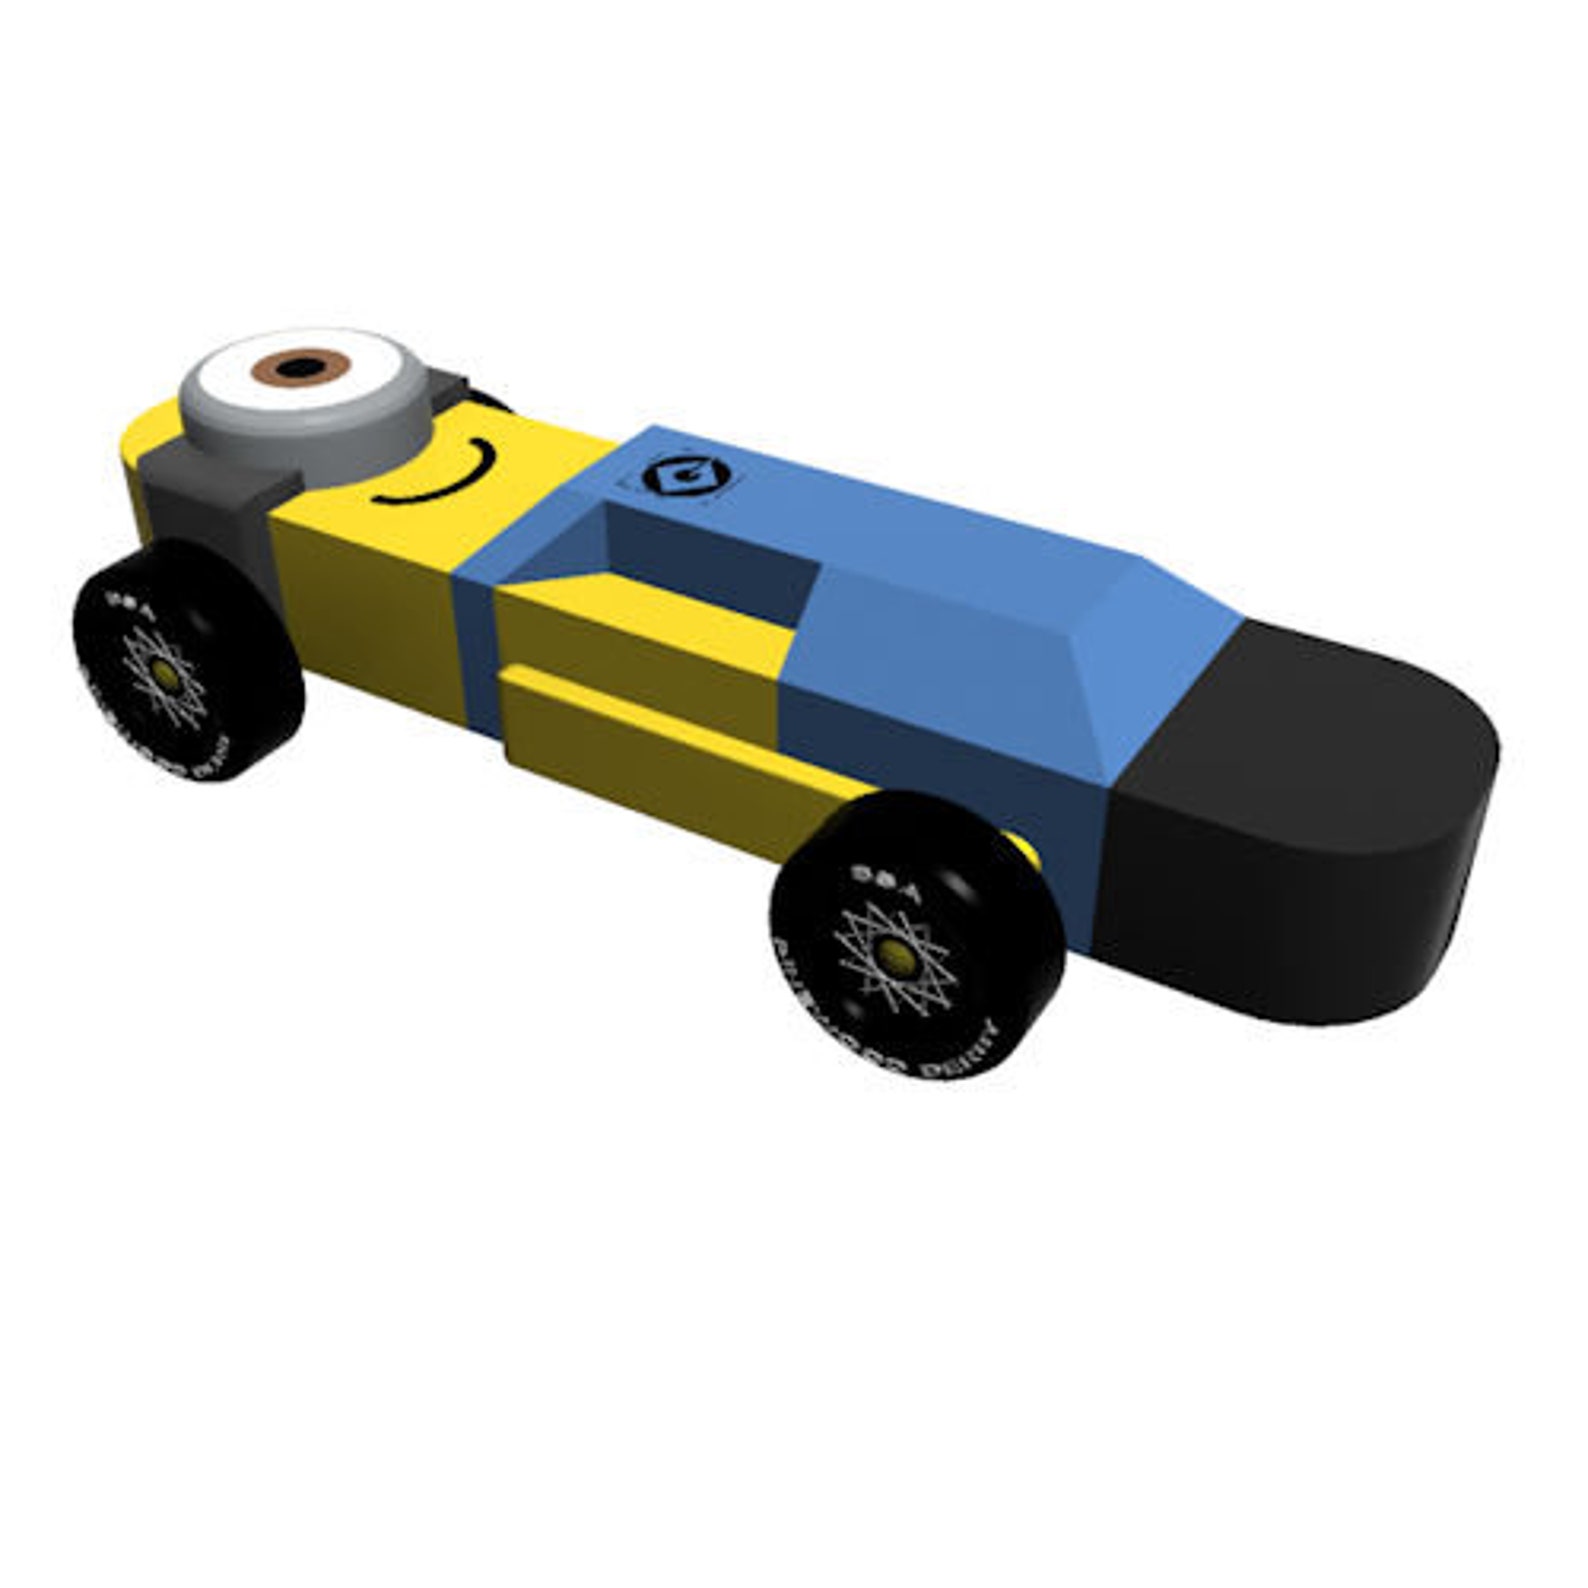 minion-pinewood-derby-car-design-plan-how-to-cut-a-pinewood-etsy